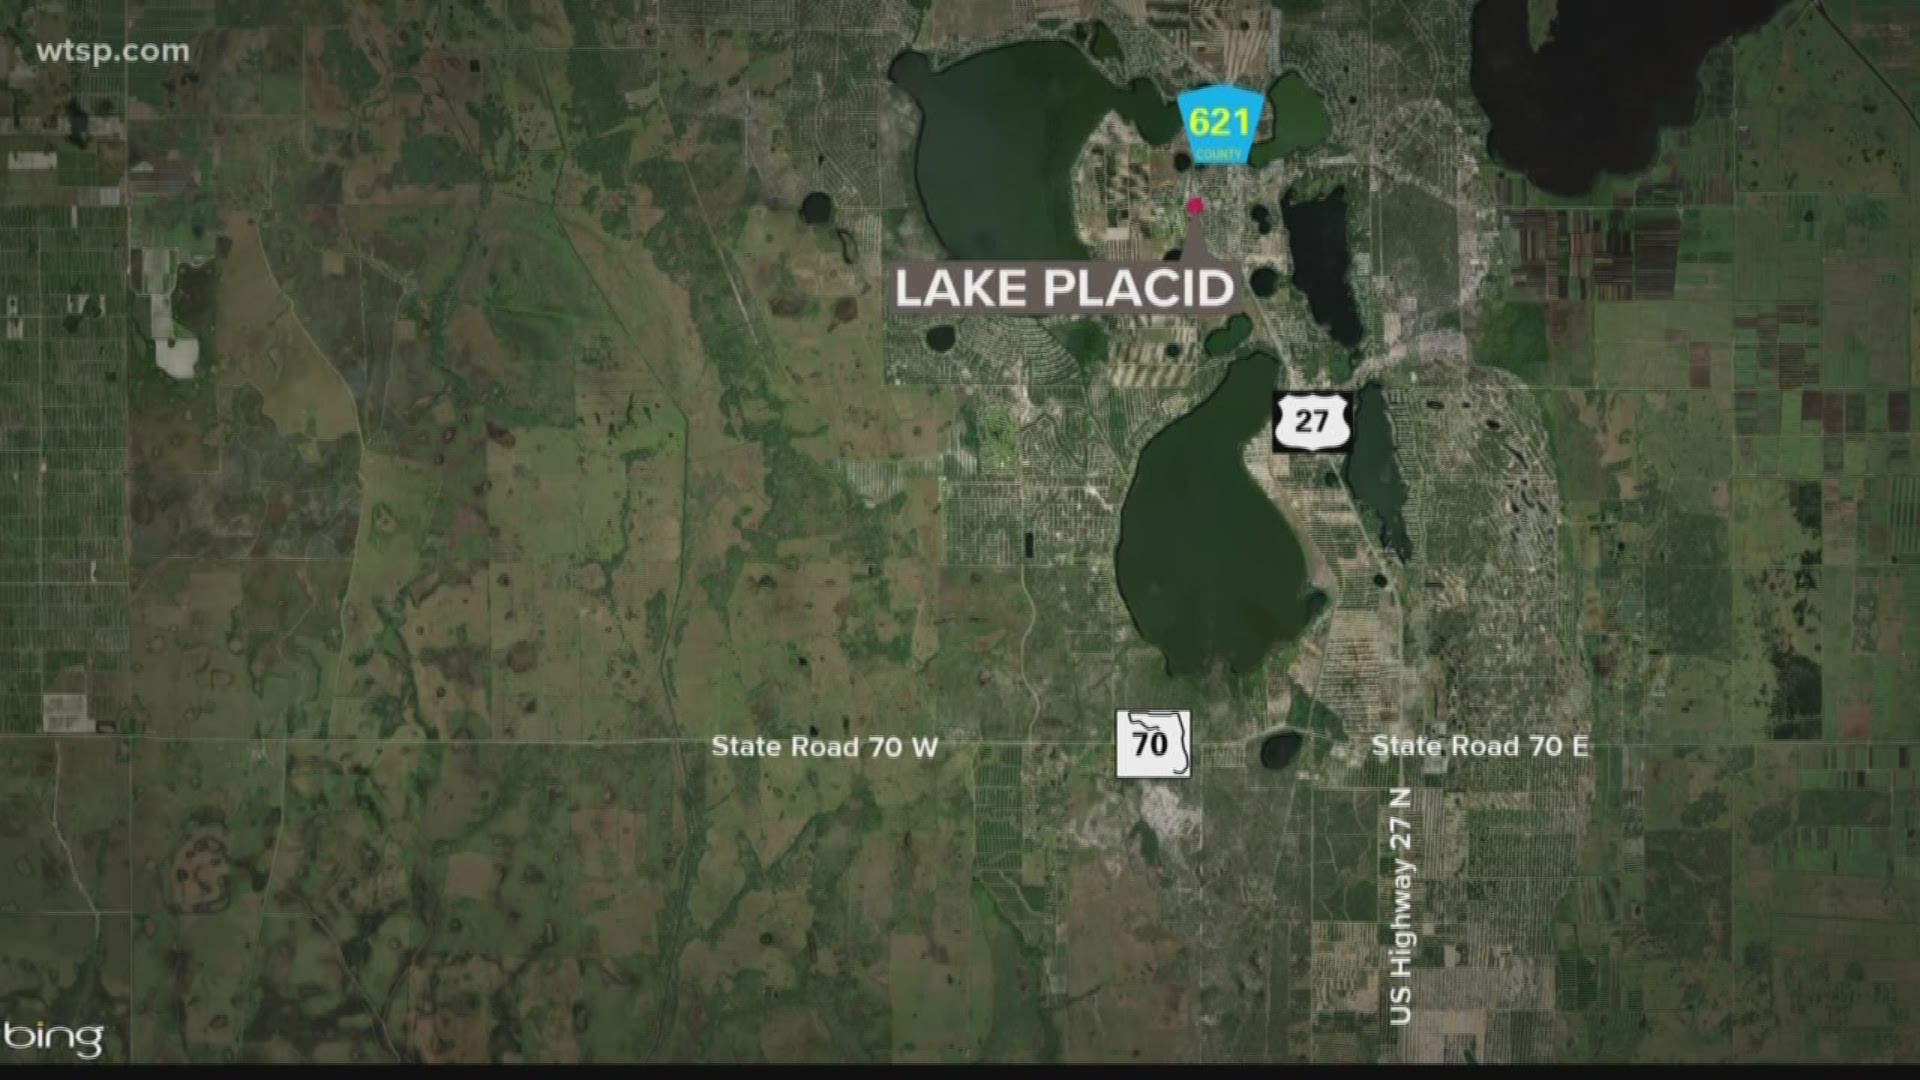 A 45-year-old man had died after an apparent attack by a pack of dogs, the Highlands County Sheriff's Office said Thursday.

Deputies received the call just before noon of a body in a wooded area behind a home in the southeast part of the Highway Park area.